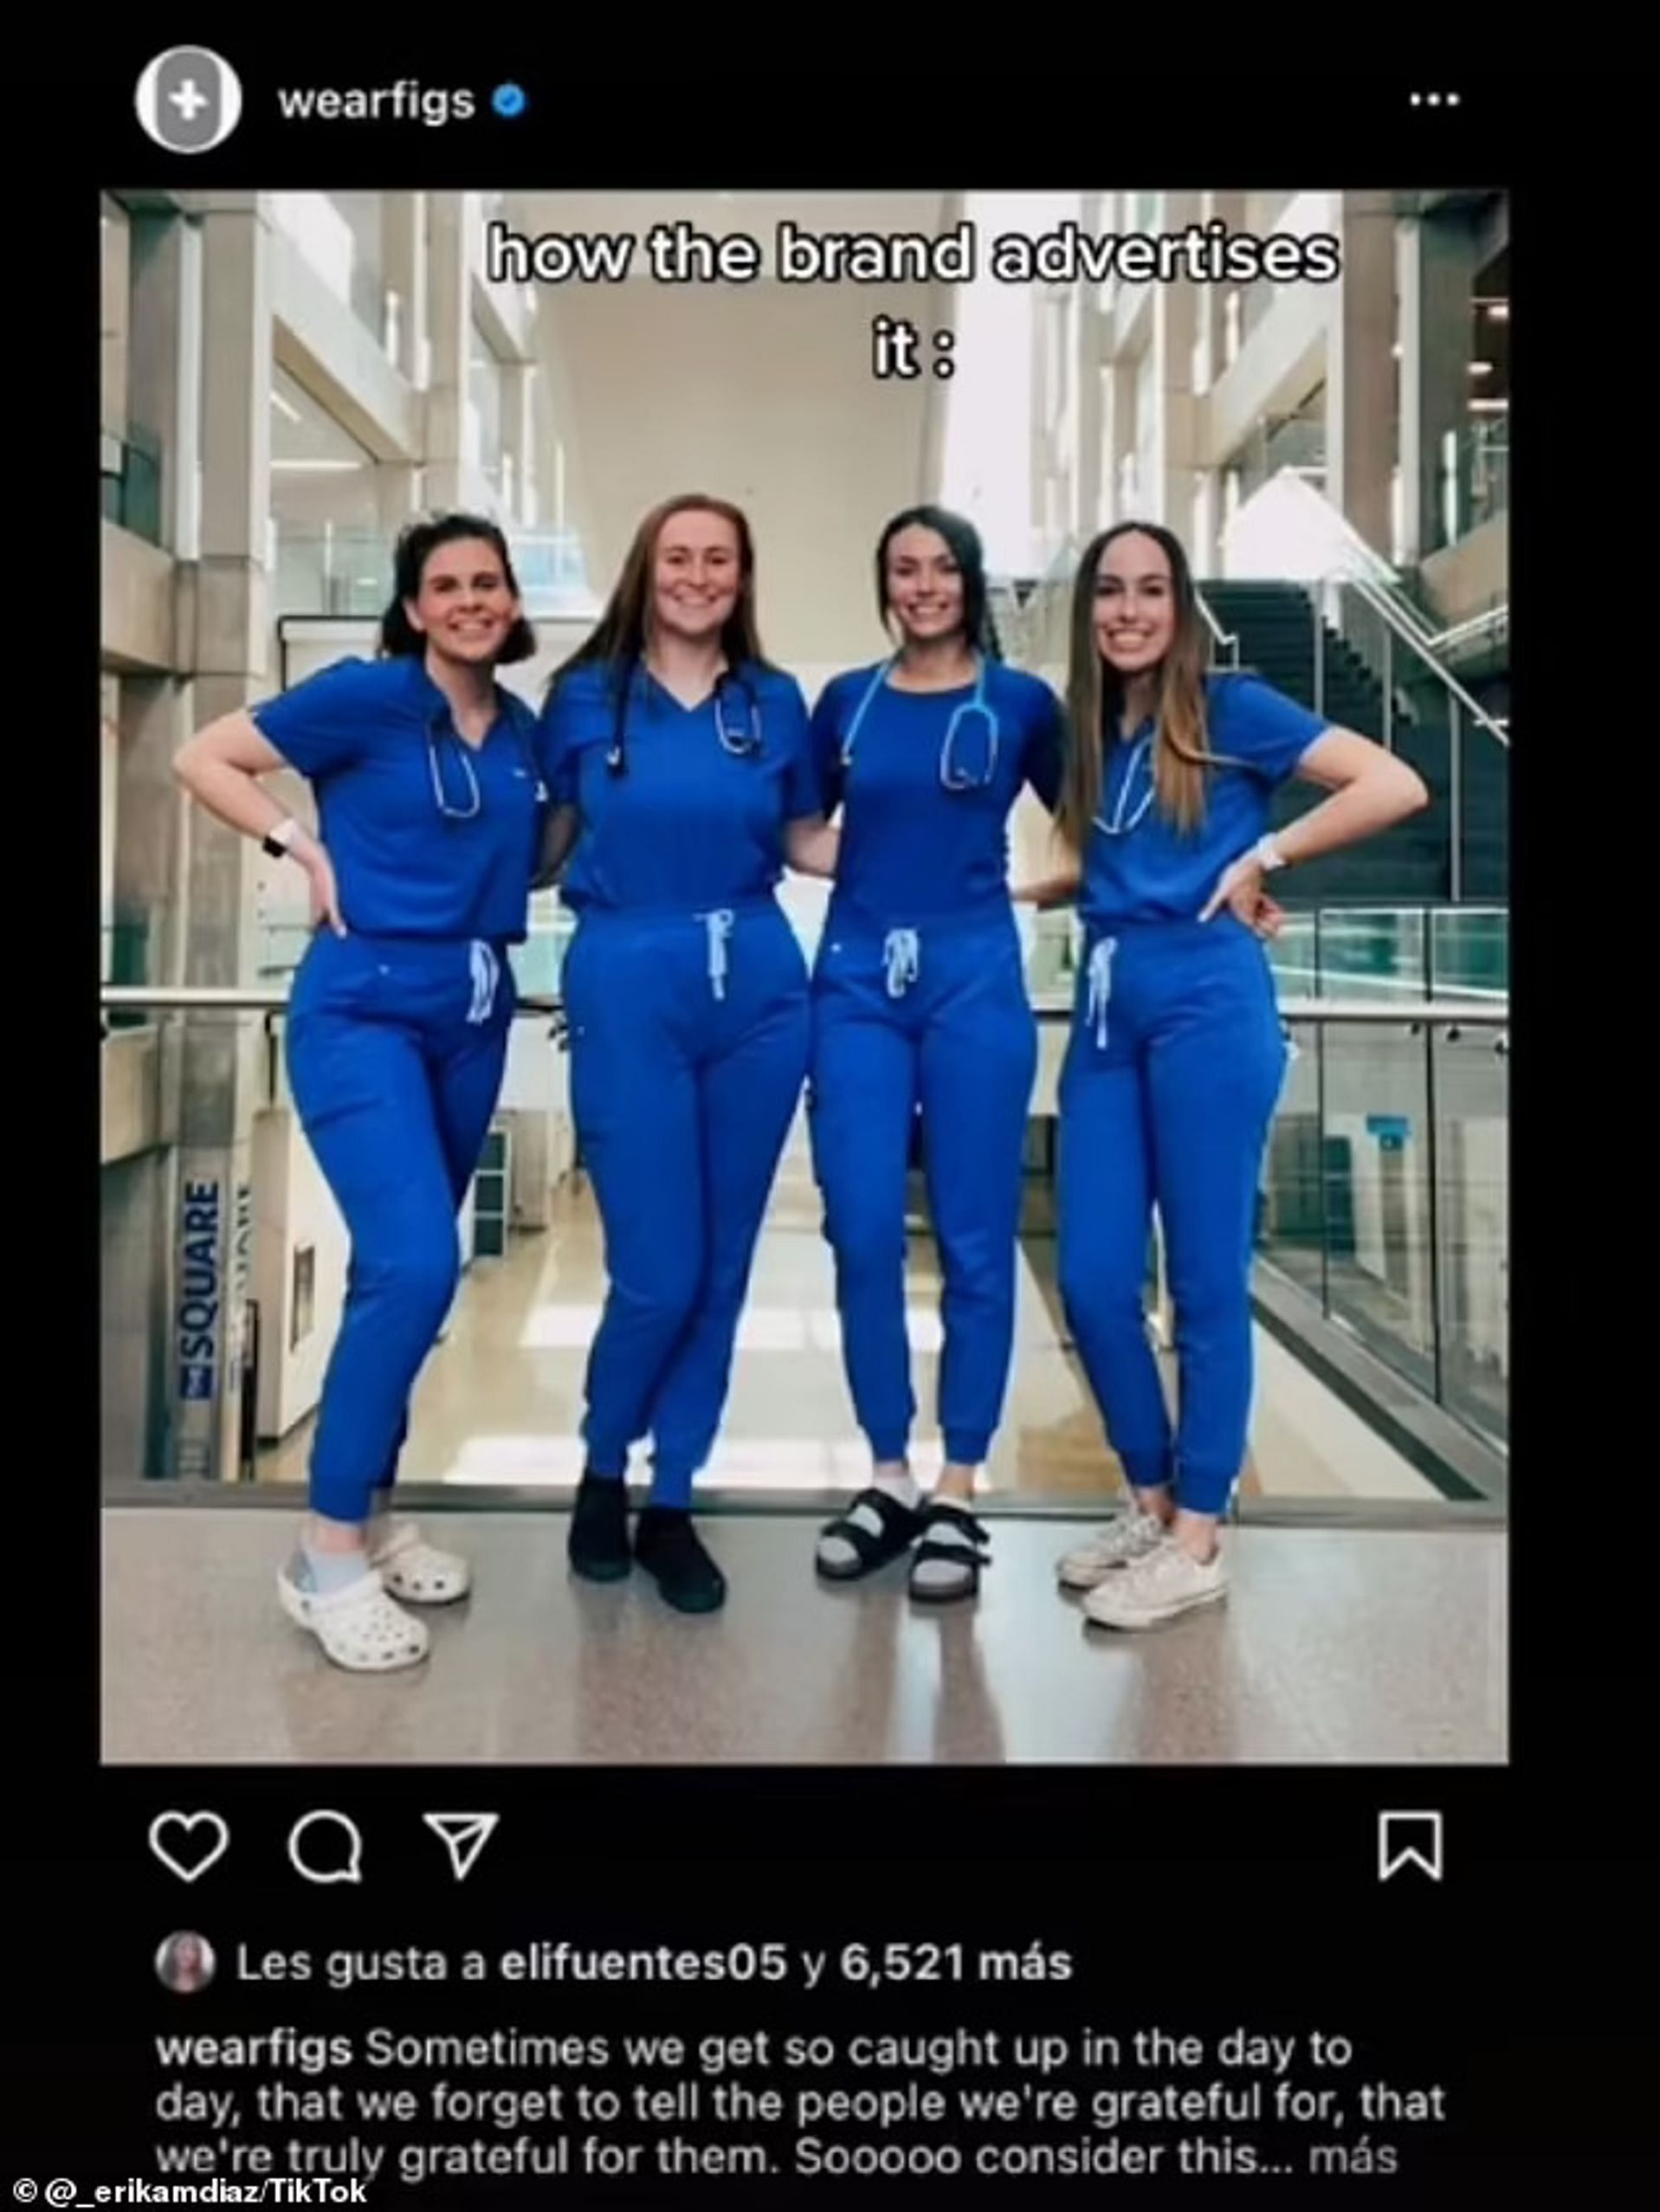 Erika gives a comparison of how the scrubs fit her Vs how they are actually advertised. (Image via Twitter)